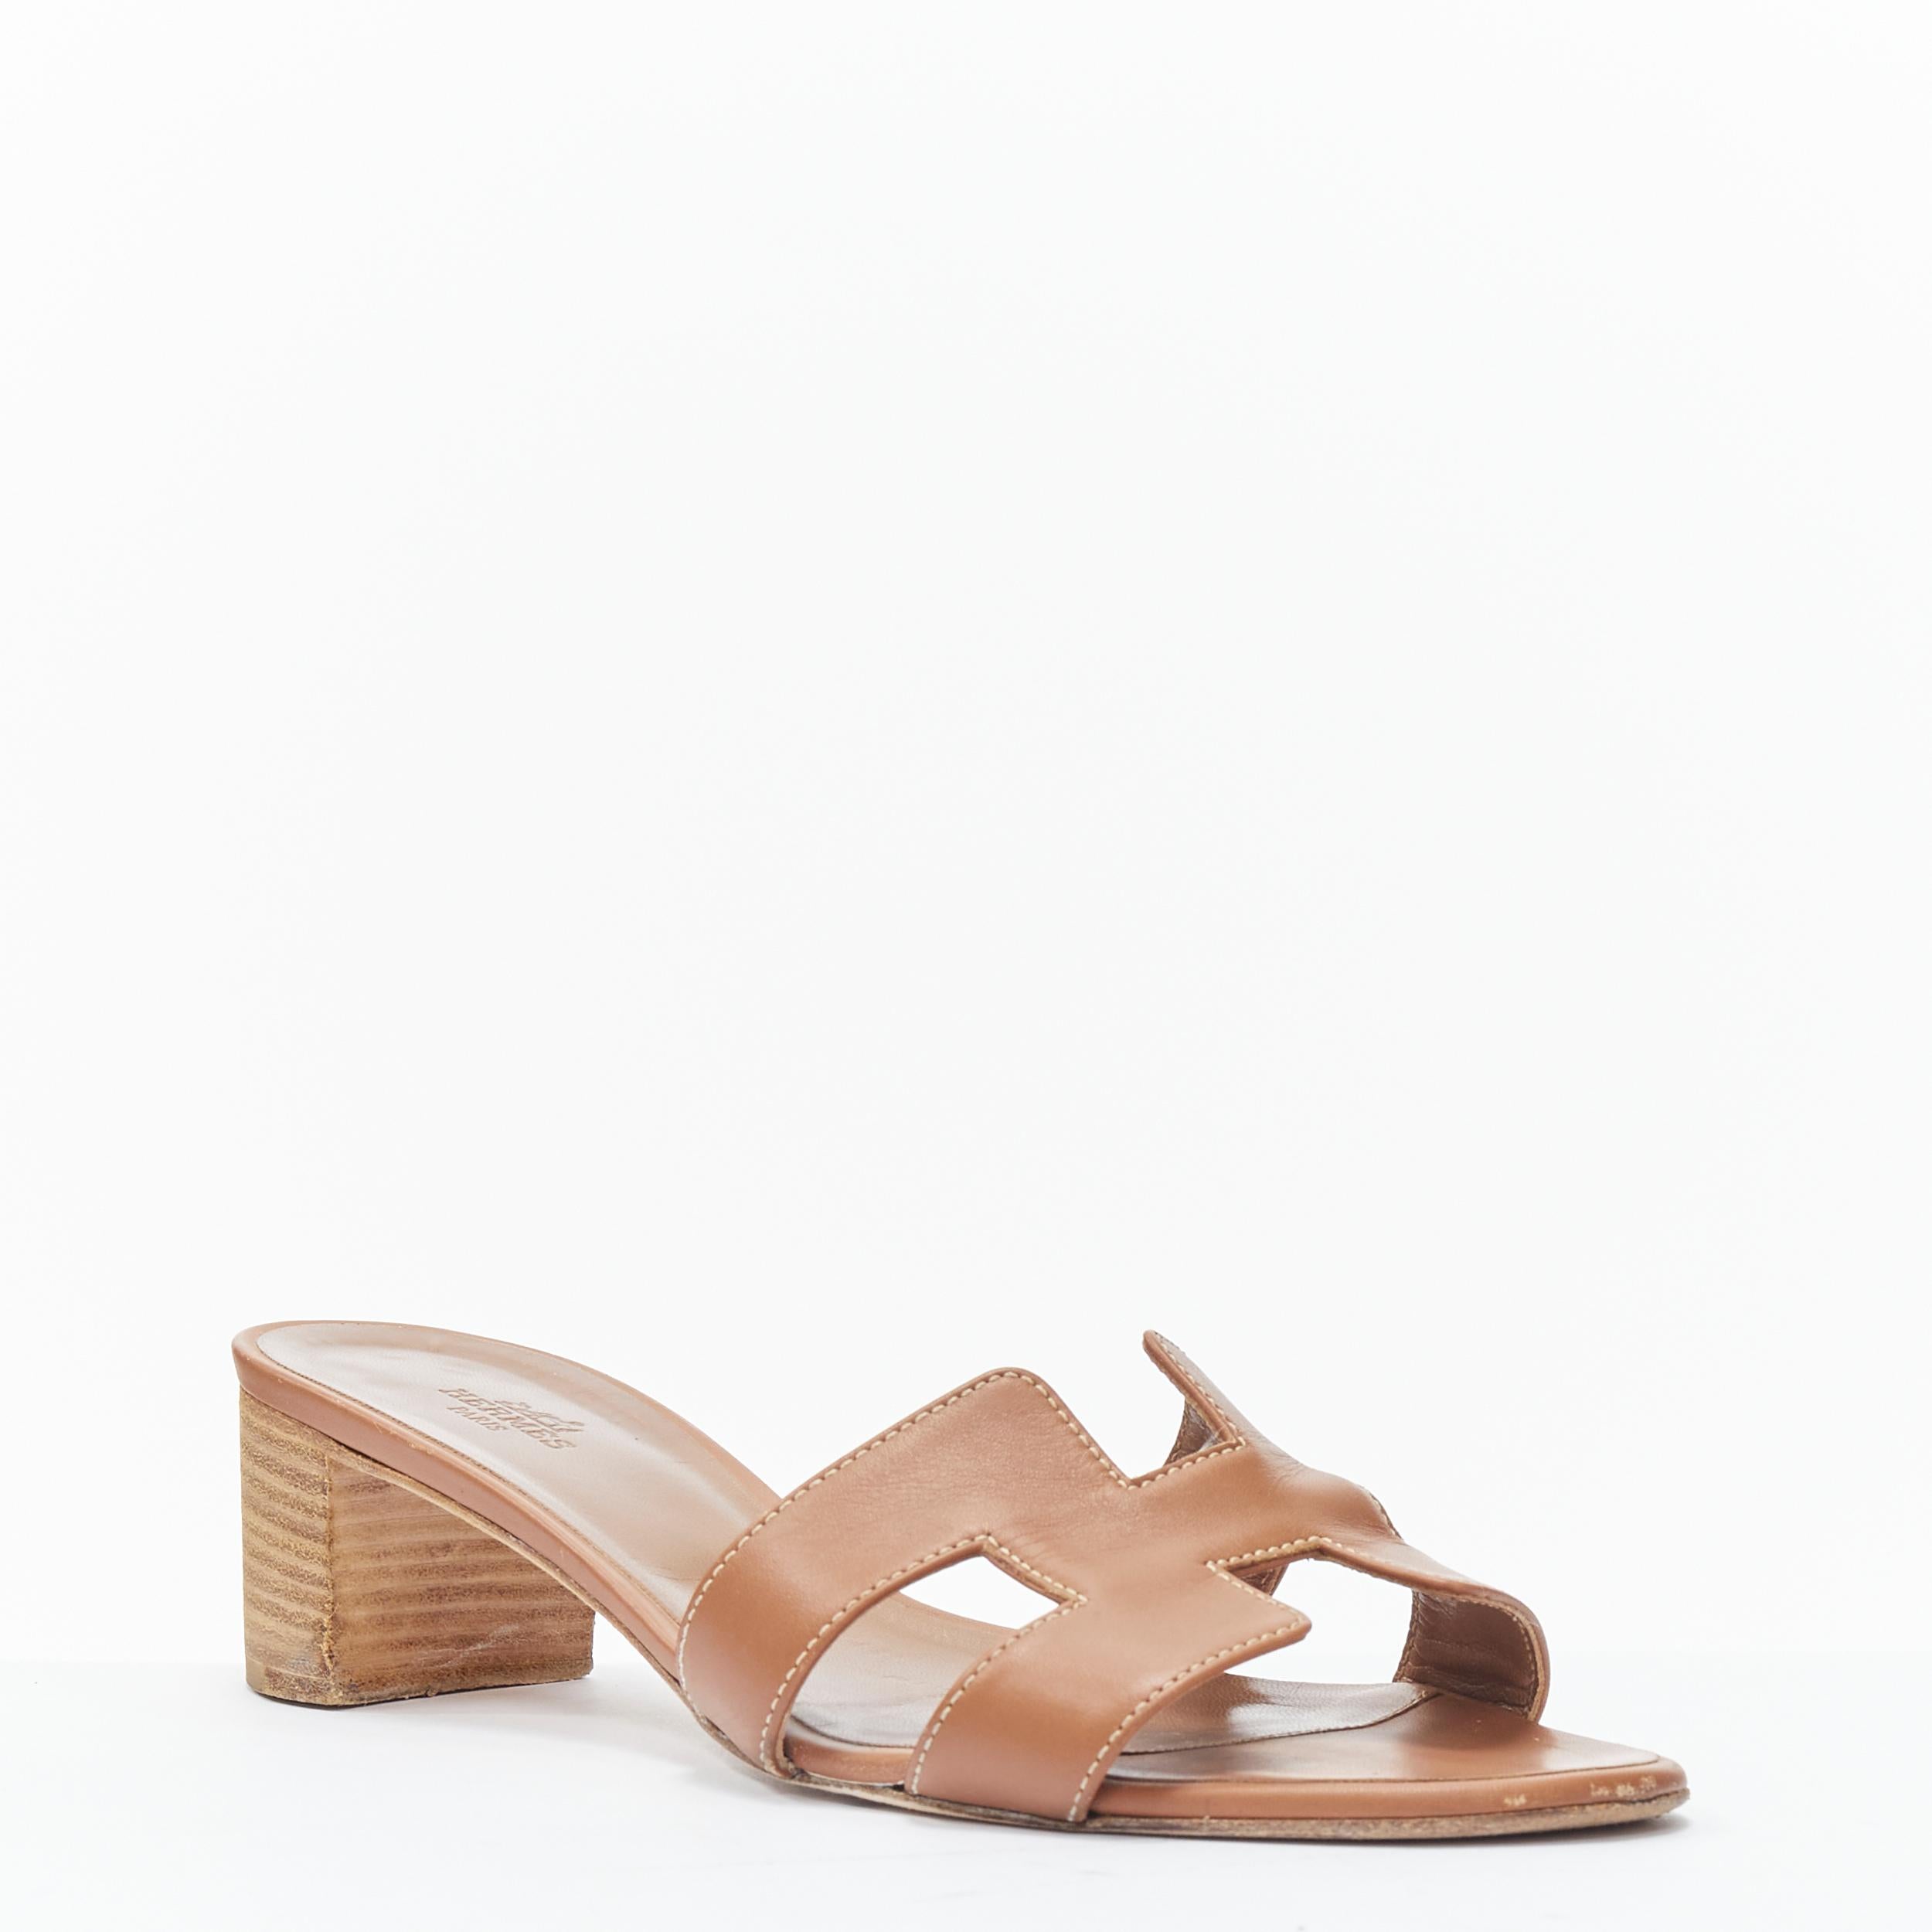 HERMES Oasis H logo tan brown leather wooden block heel slide sandals EU38.5 
Reference: TGAS/B01362 
Brand: Hermes 
Model: Oasis Tan sandals 
Material: Leather 
Color: Brown 
Pattern: Solid 
Extra Detail: Oasis H. Stacked wooden block heel. 
Made